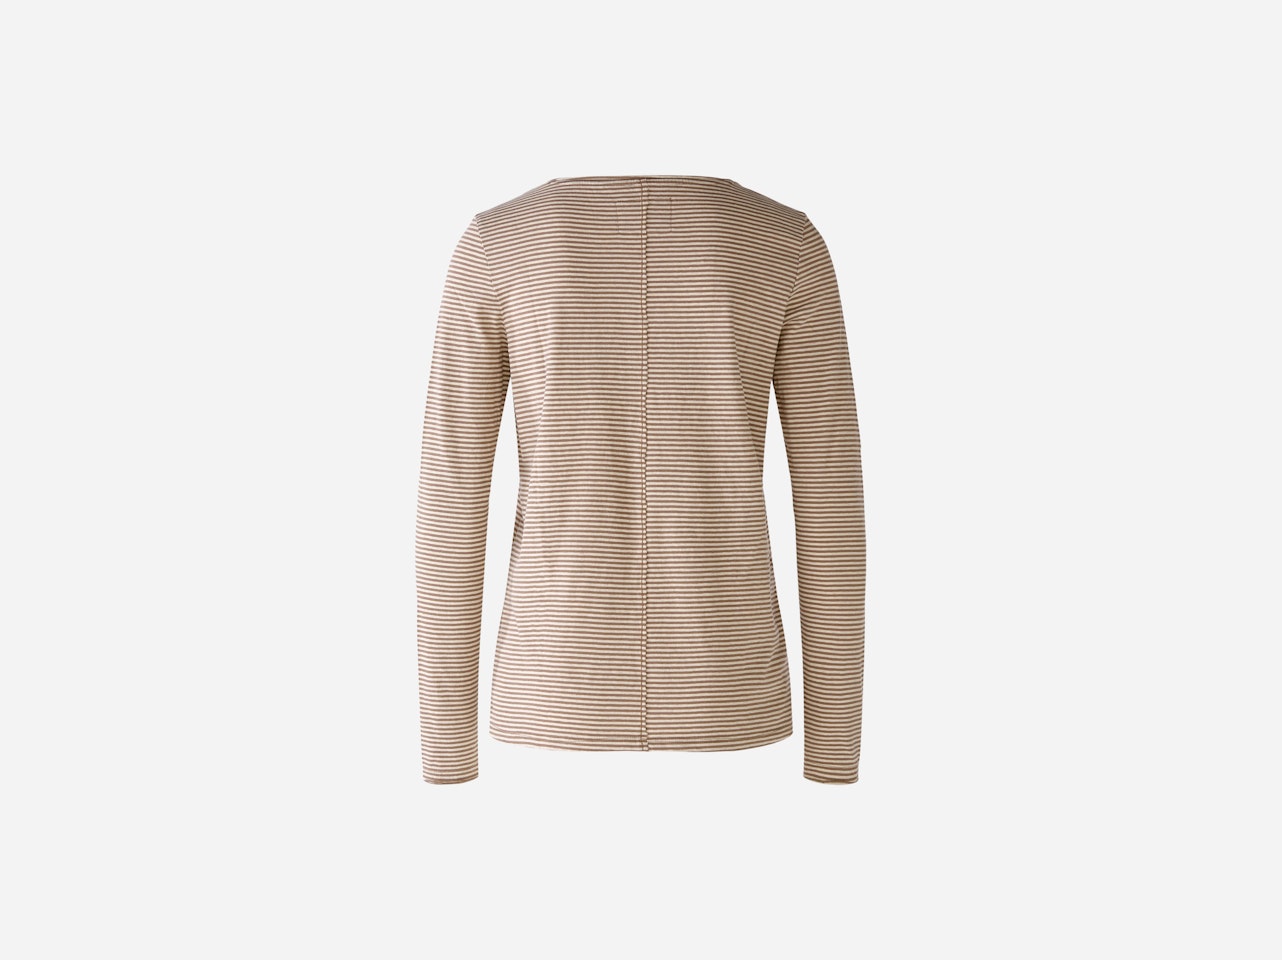 Bild 7 von Long-sleeved shirt made from 100% organic cotton in lt stone taupe | Oui